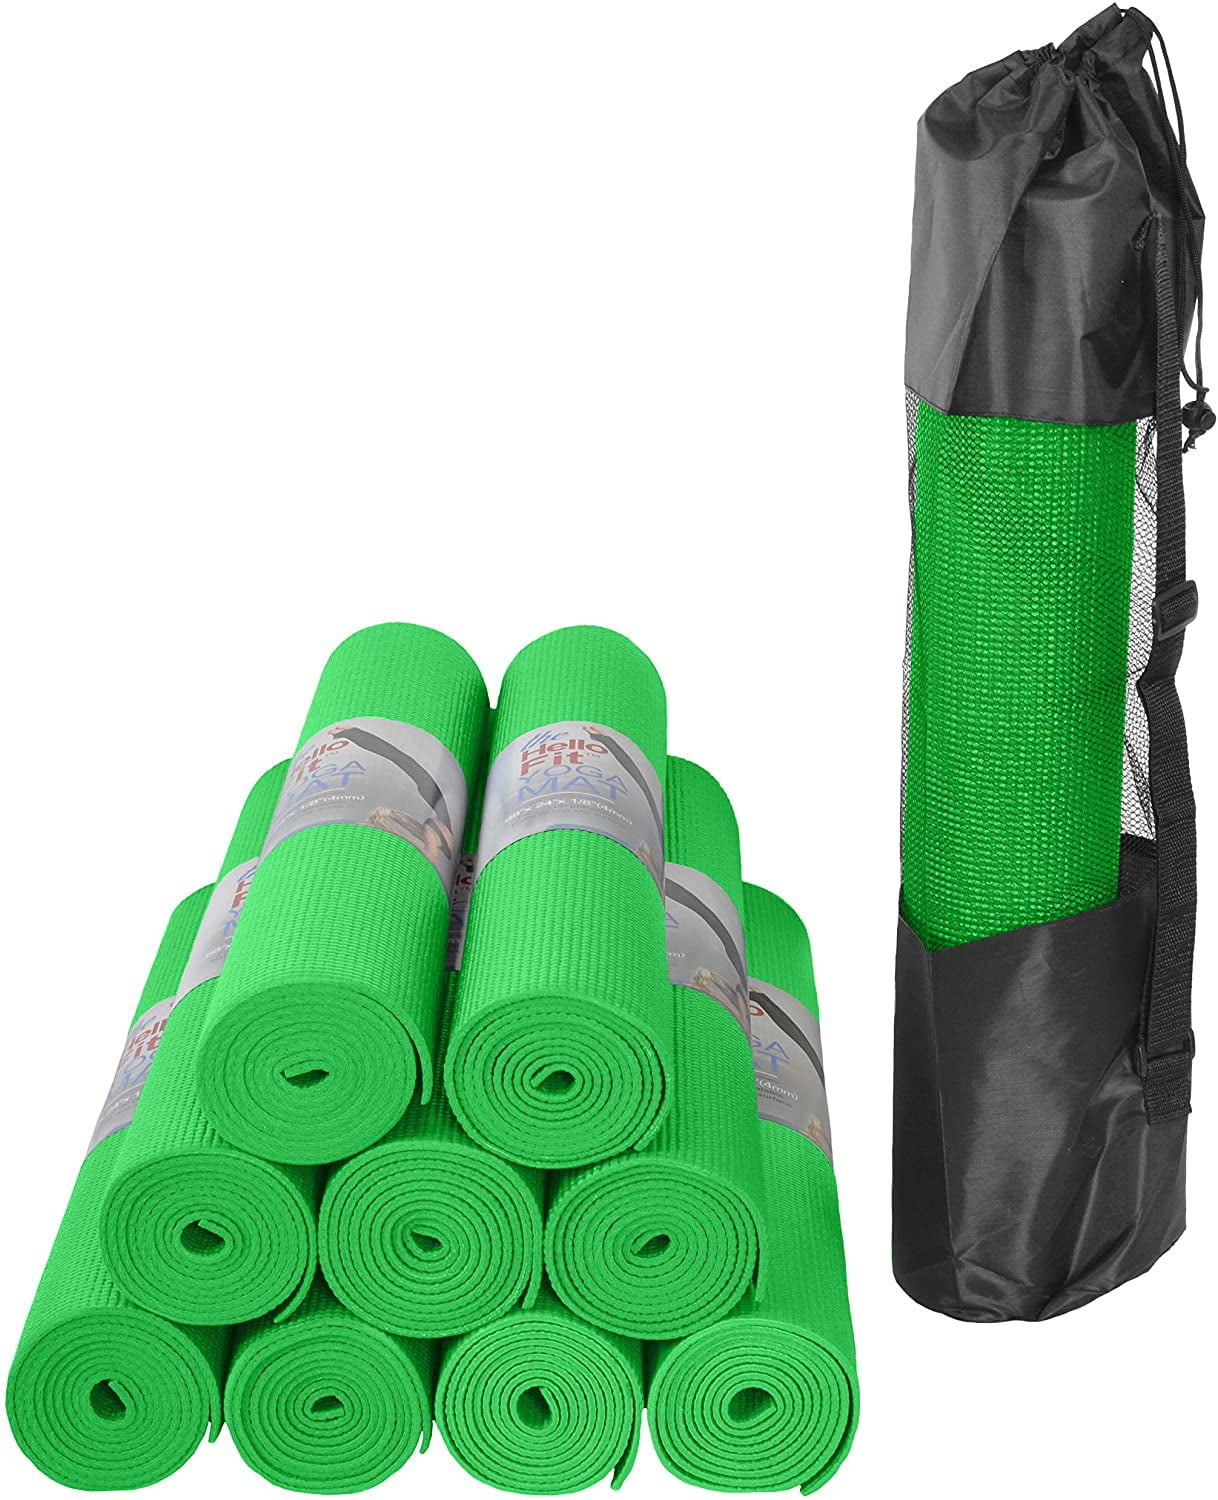 Hello Fit Yoga Mats (68 x 24 x 4mm) with Carrying Bags - Studio 10 Pack -  Wholesale (Green) 